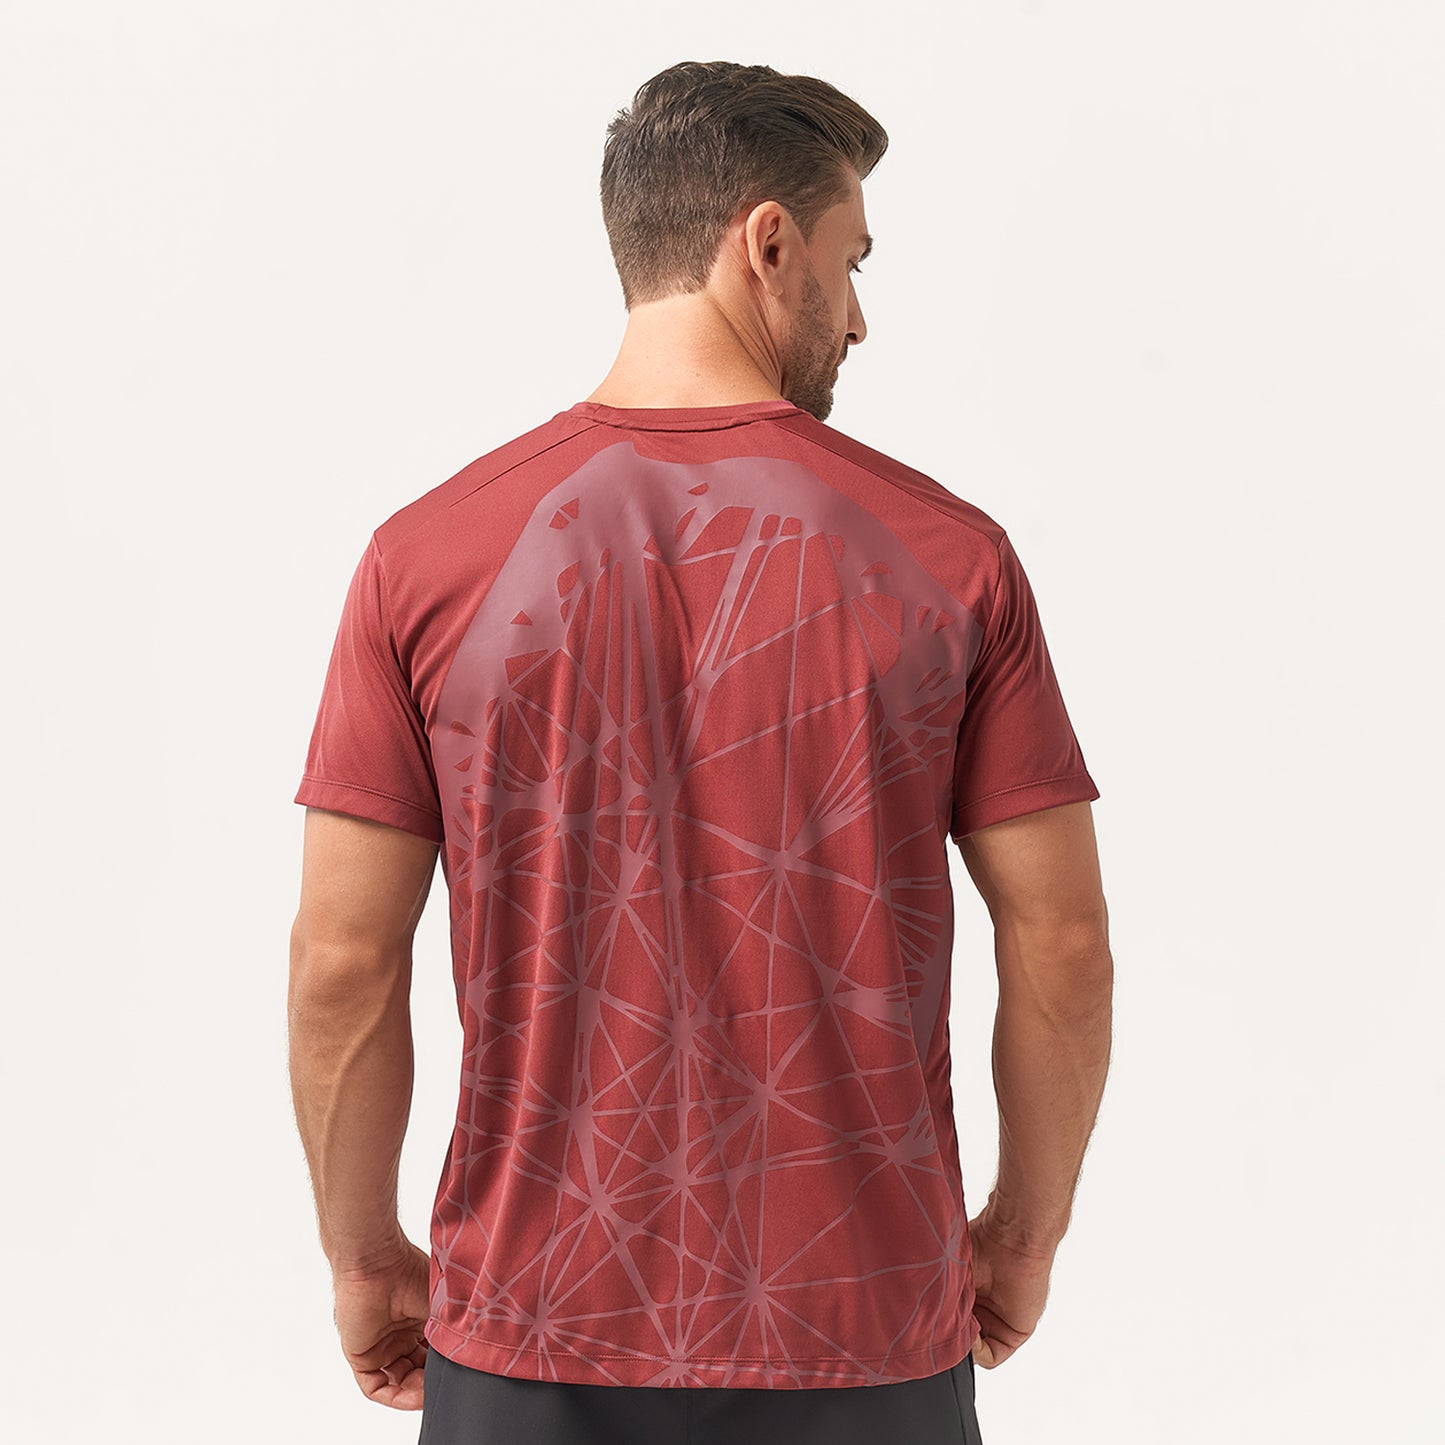 squatwolf-gym-wear-code-urban-tee-red-workout-shirts-for-men